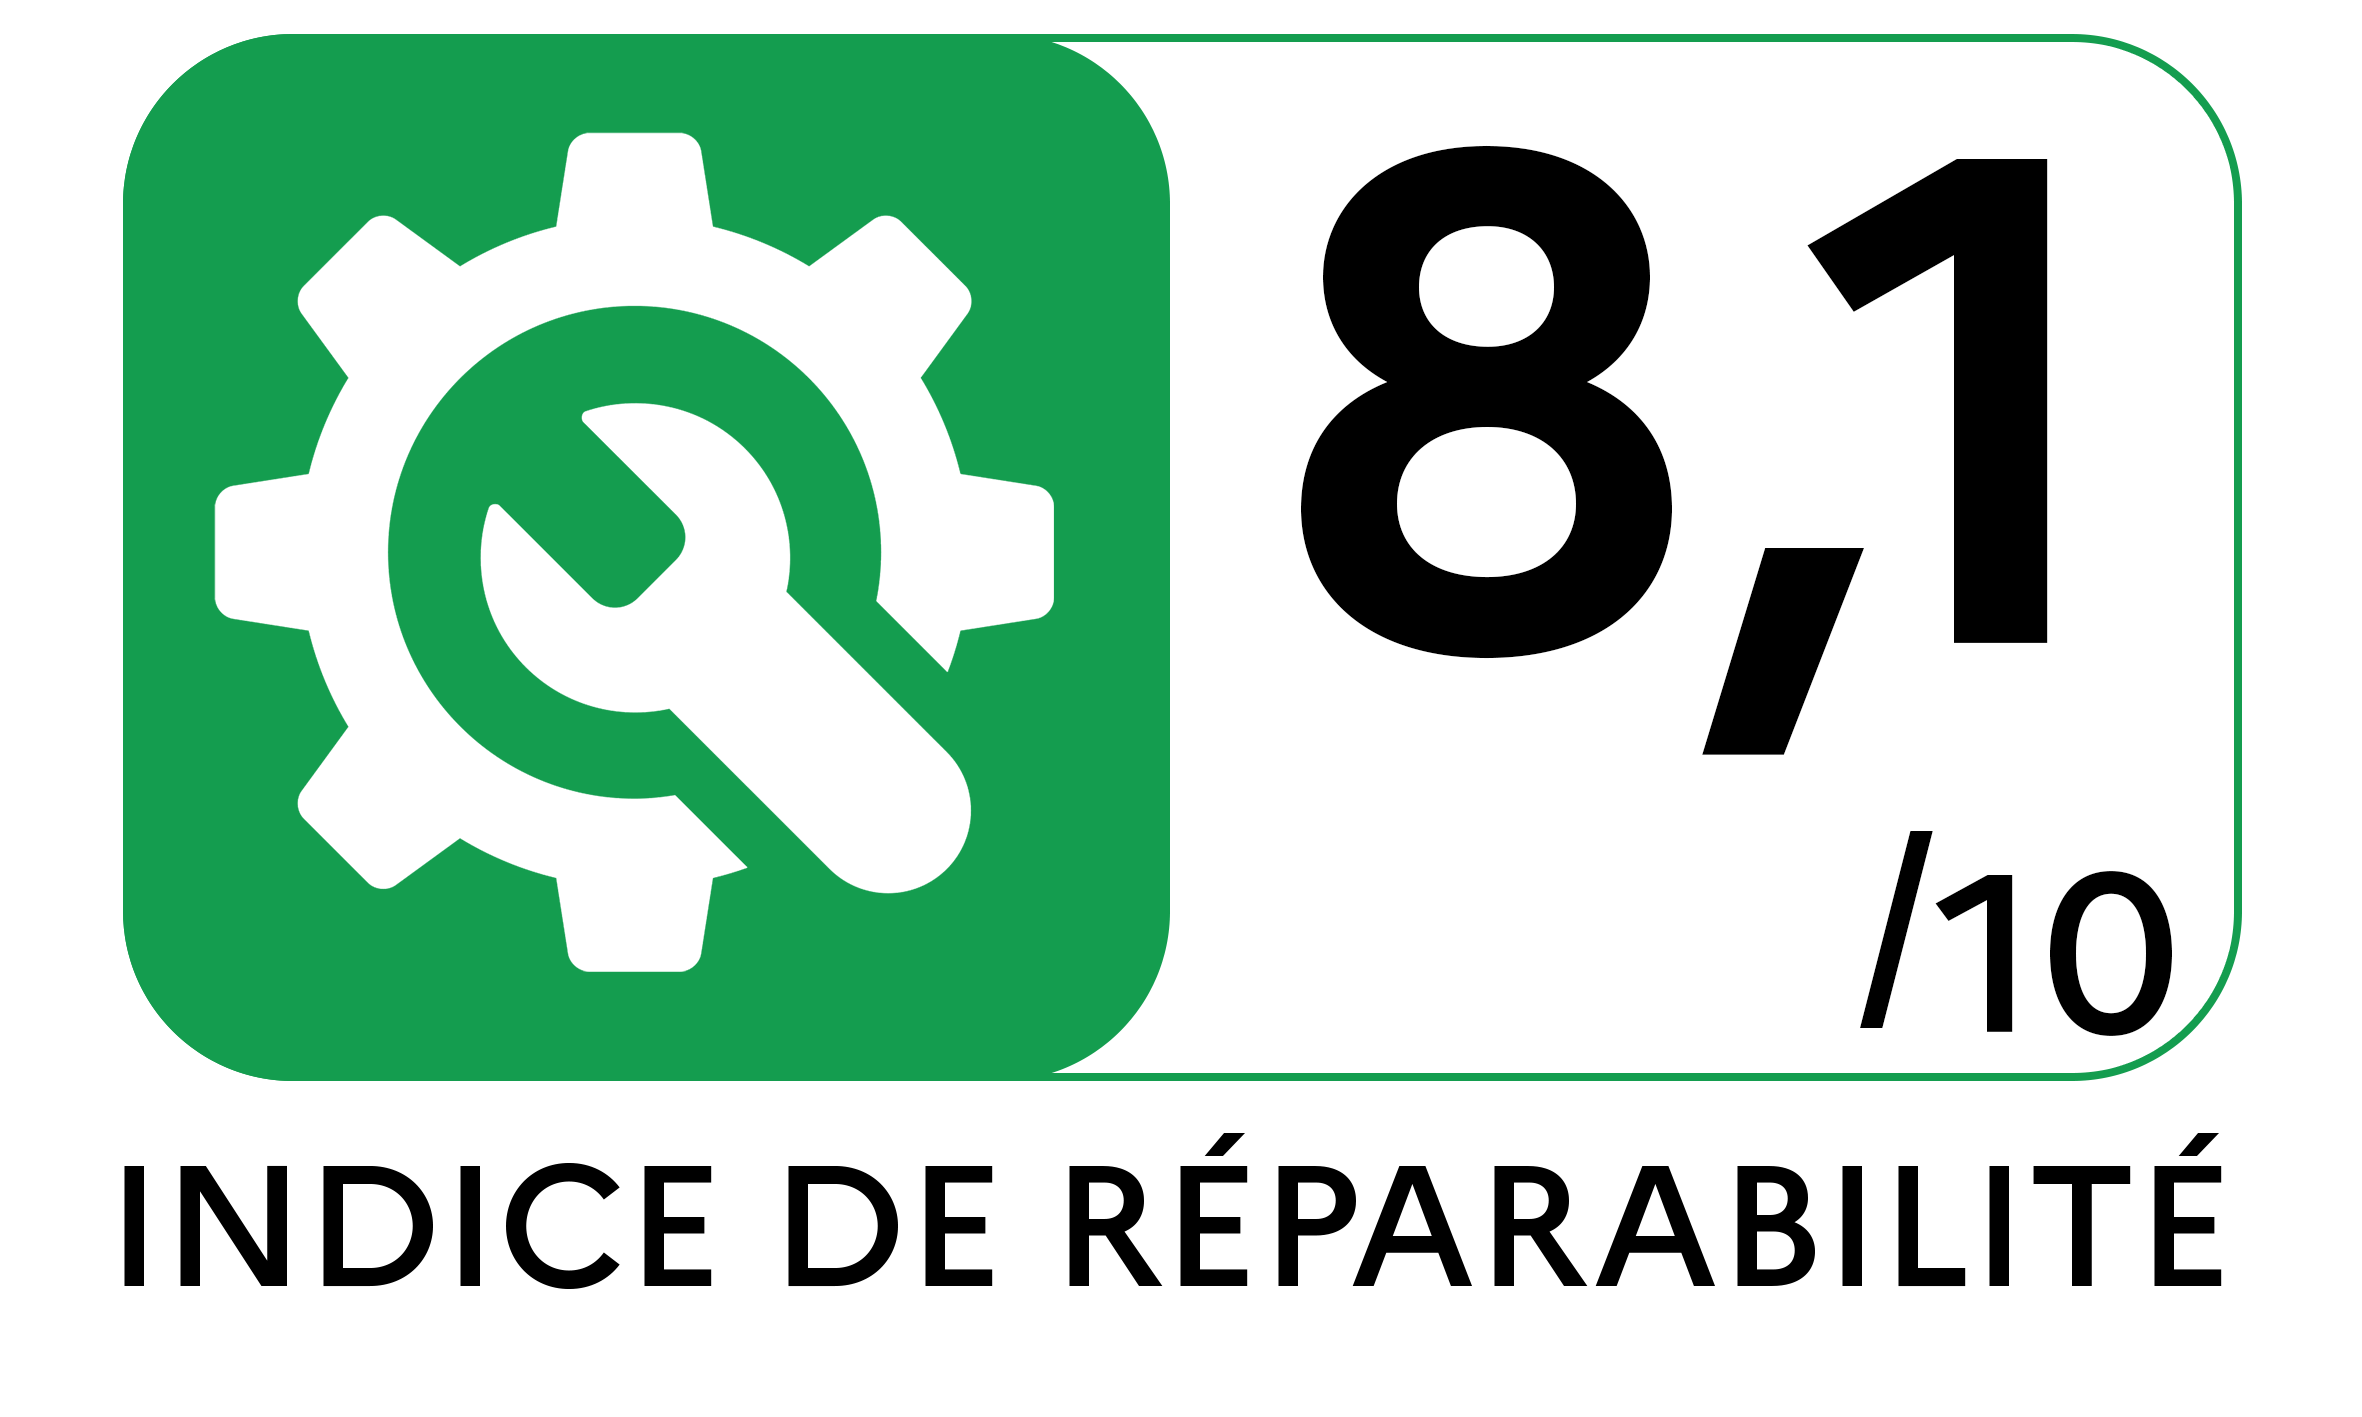 logo-index-of-reparability-8-1.png